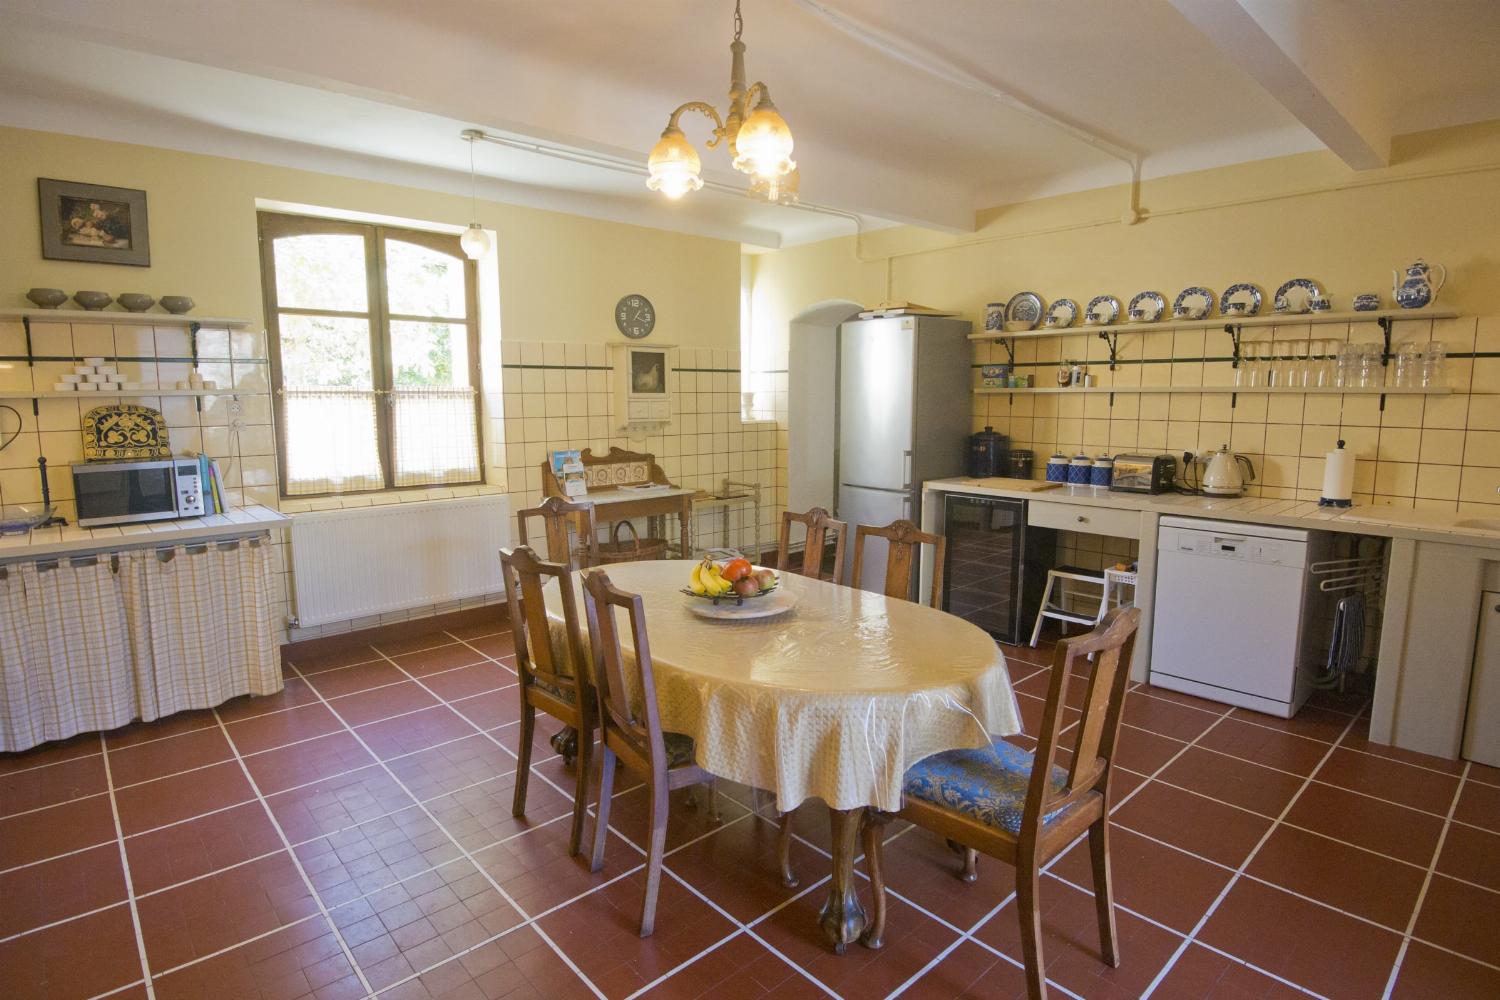 Kitchen | Rental home in Nouvelle-Aquitaine